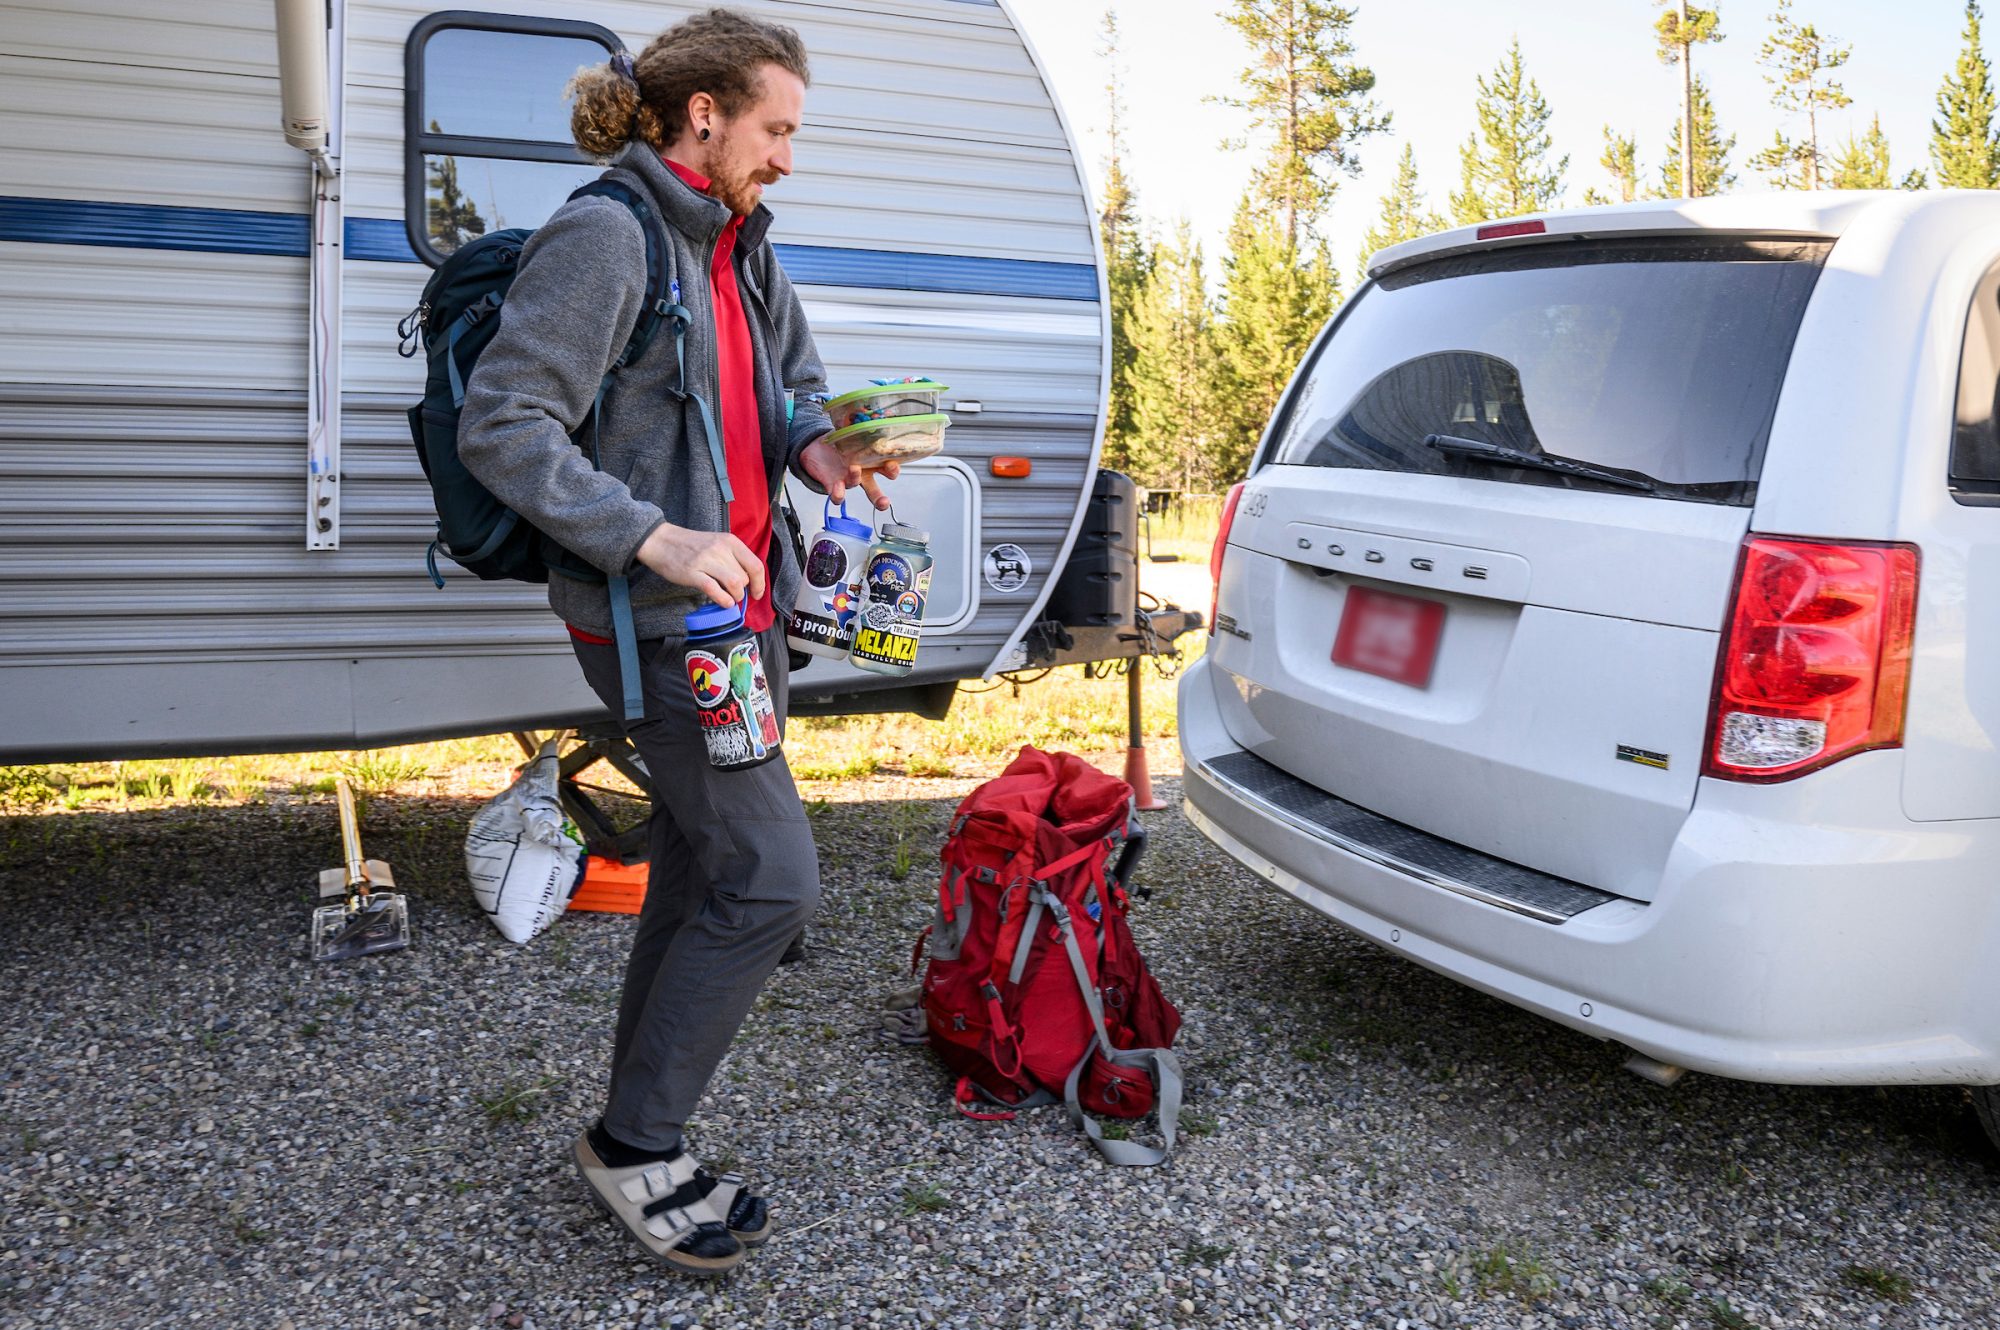 Timon Keller balances stacked containers holding his lunch and three large water bottles hanging from his fingers as he walks from the large RV to the white mini van the researchers use to drive around the parks.